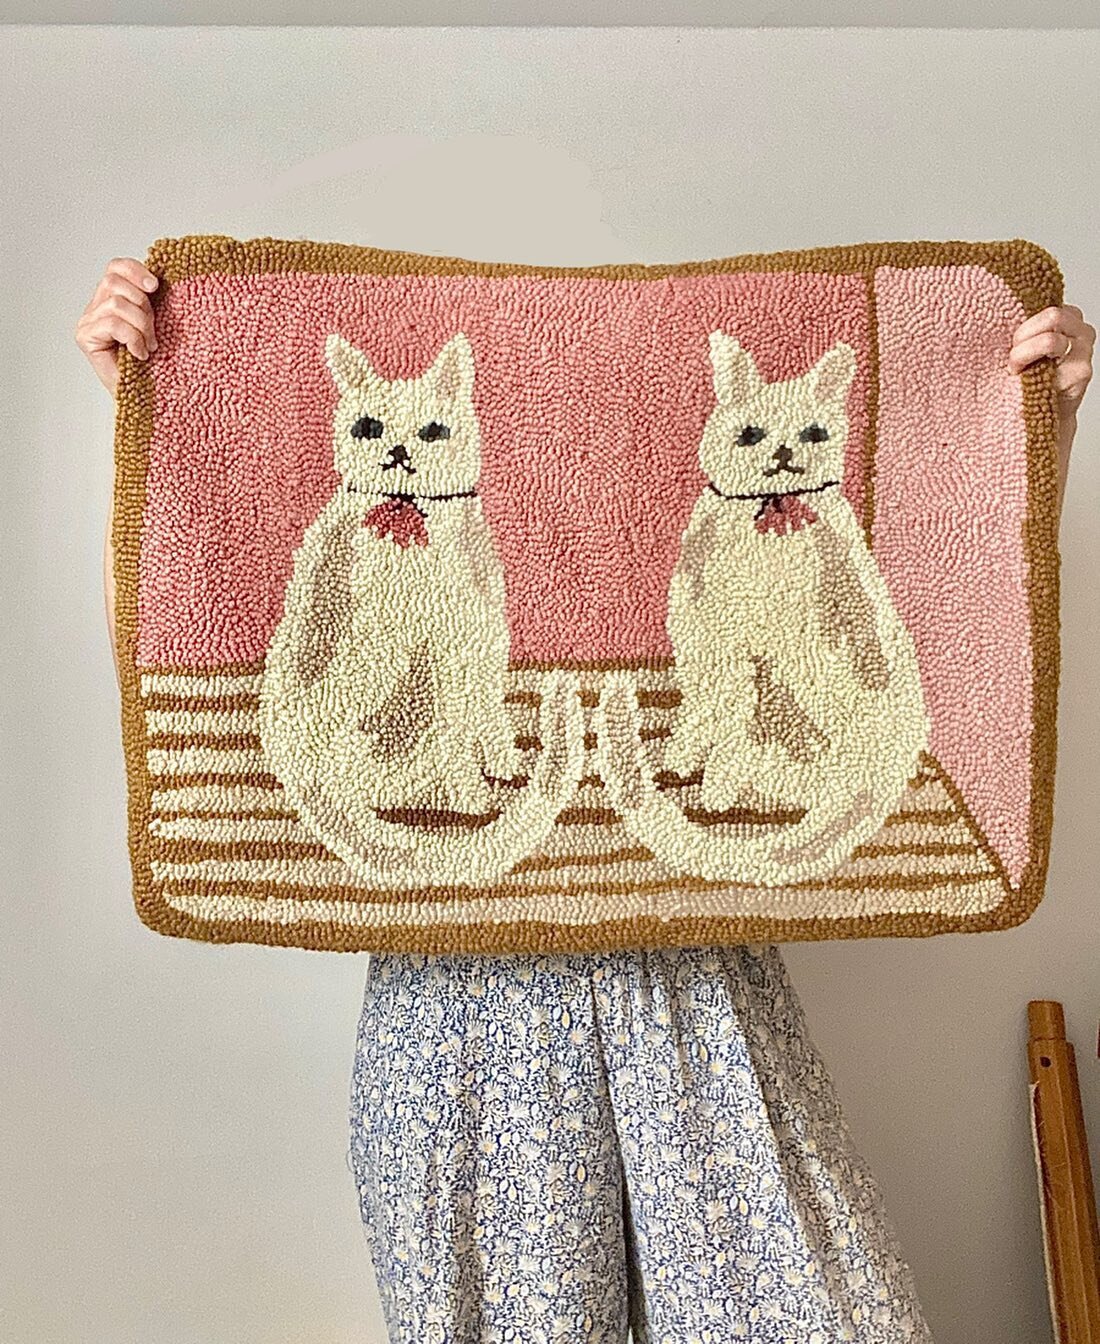 Olympia and Laure&rsquo;s kitties, a floor mat. 
.
.

#happy4thofjuly #rughooking #punchneedlerughooking #feministcraft